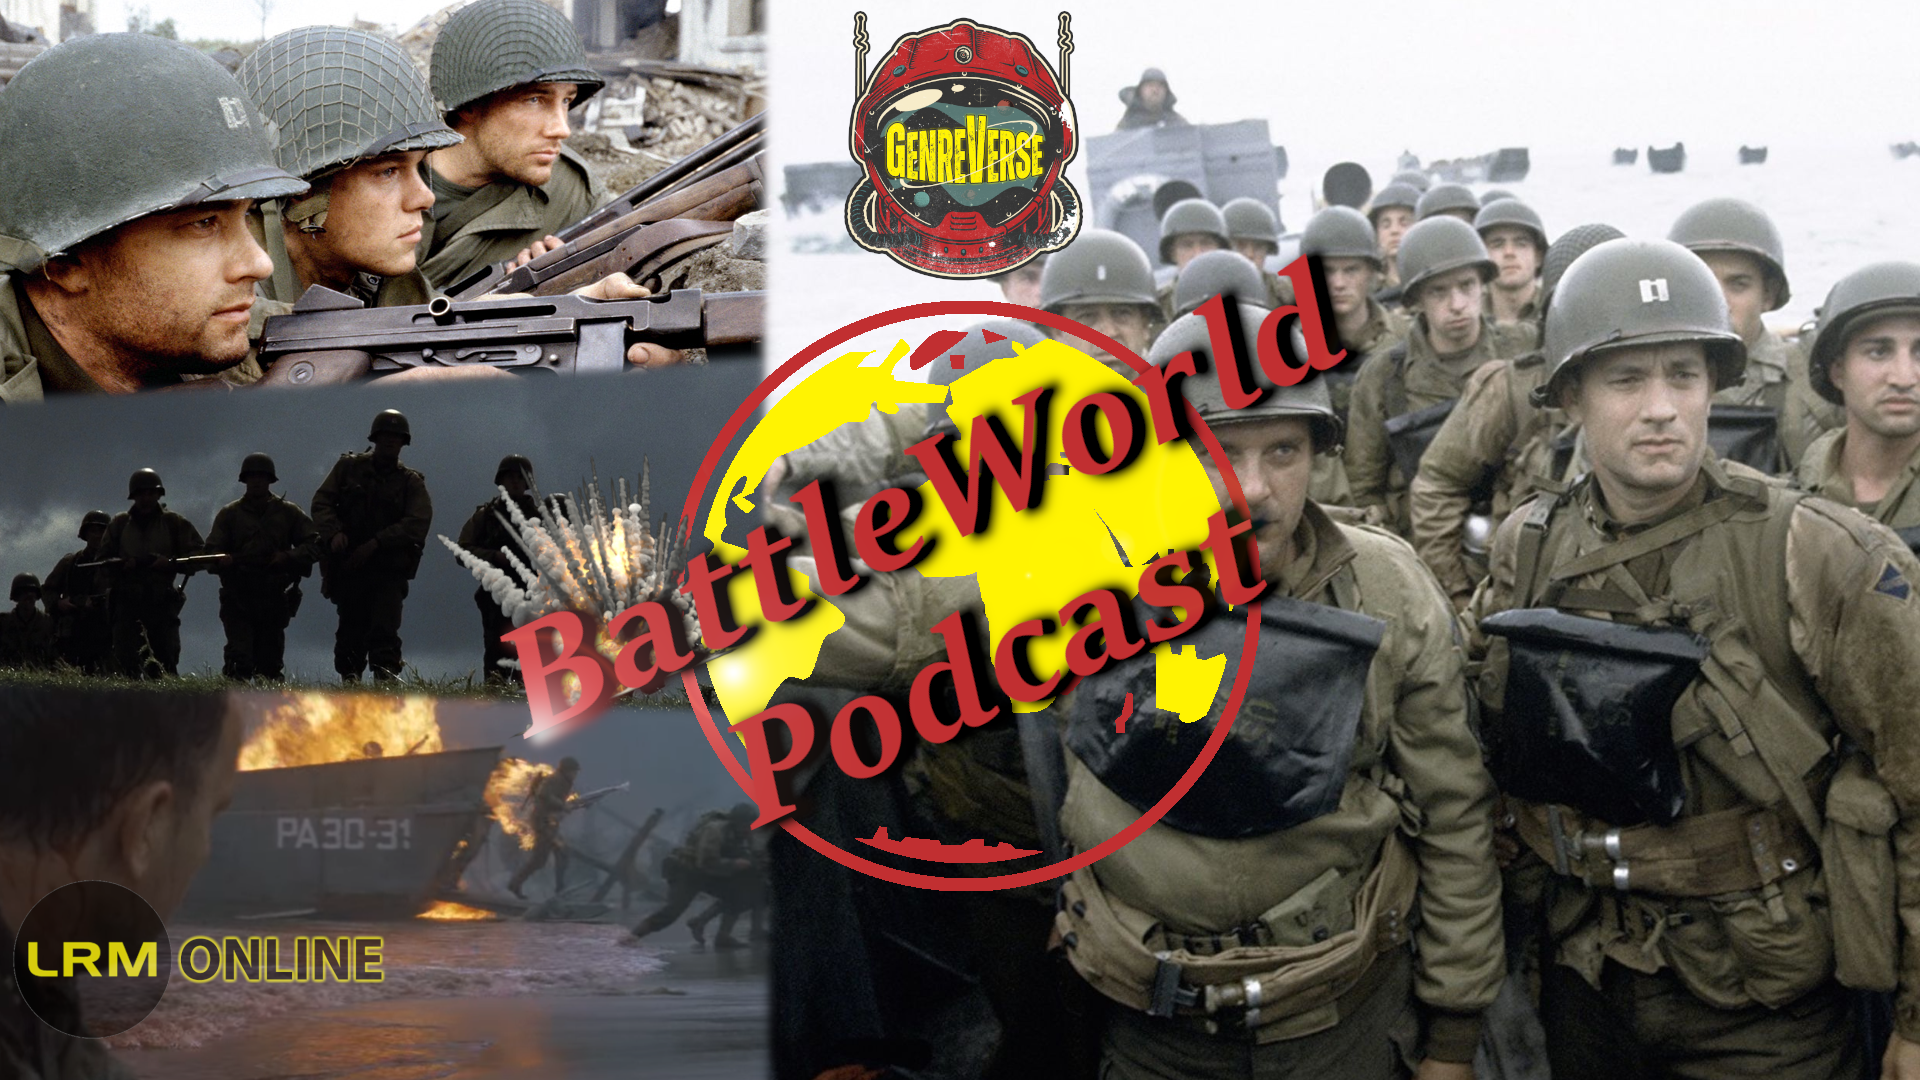 Saving Private Ryan Discussion D Day Anniversary for Operation Overlord Genreverse GVs BattleWorld Podcast 6-6-21